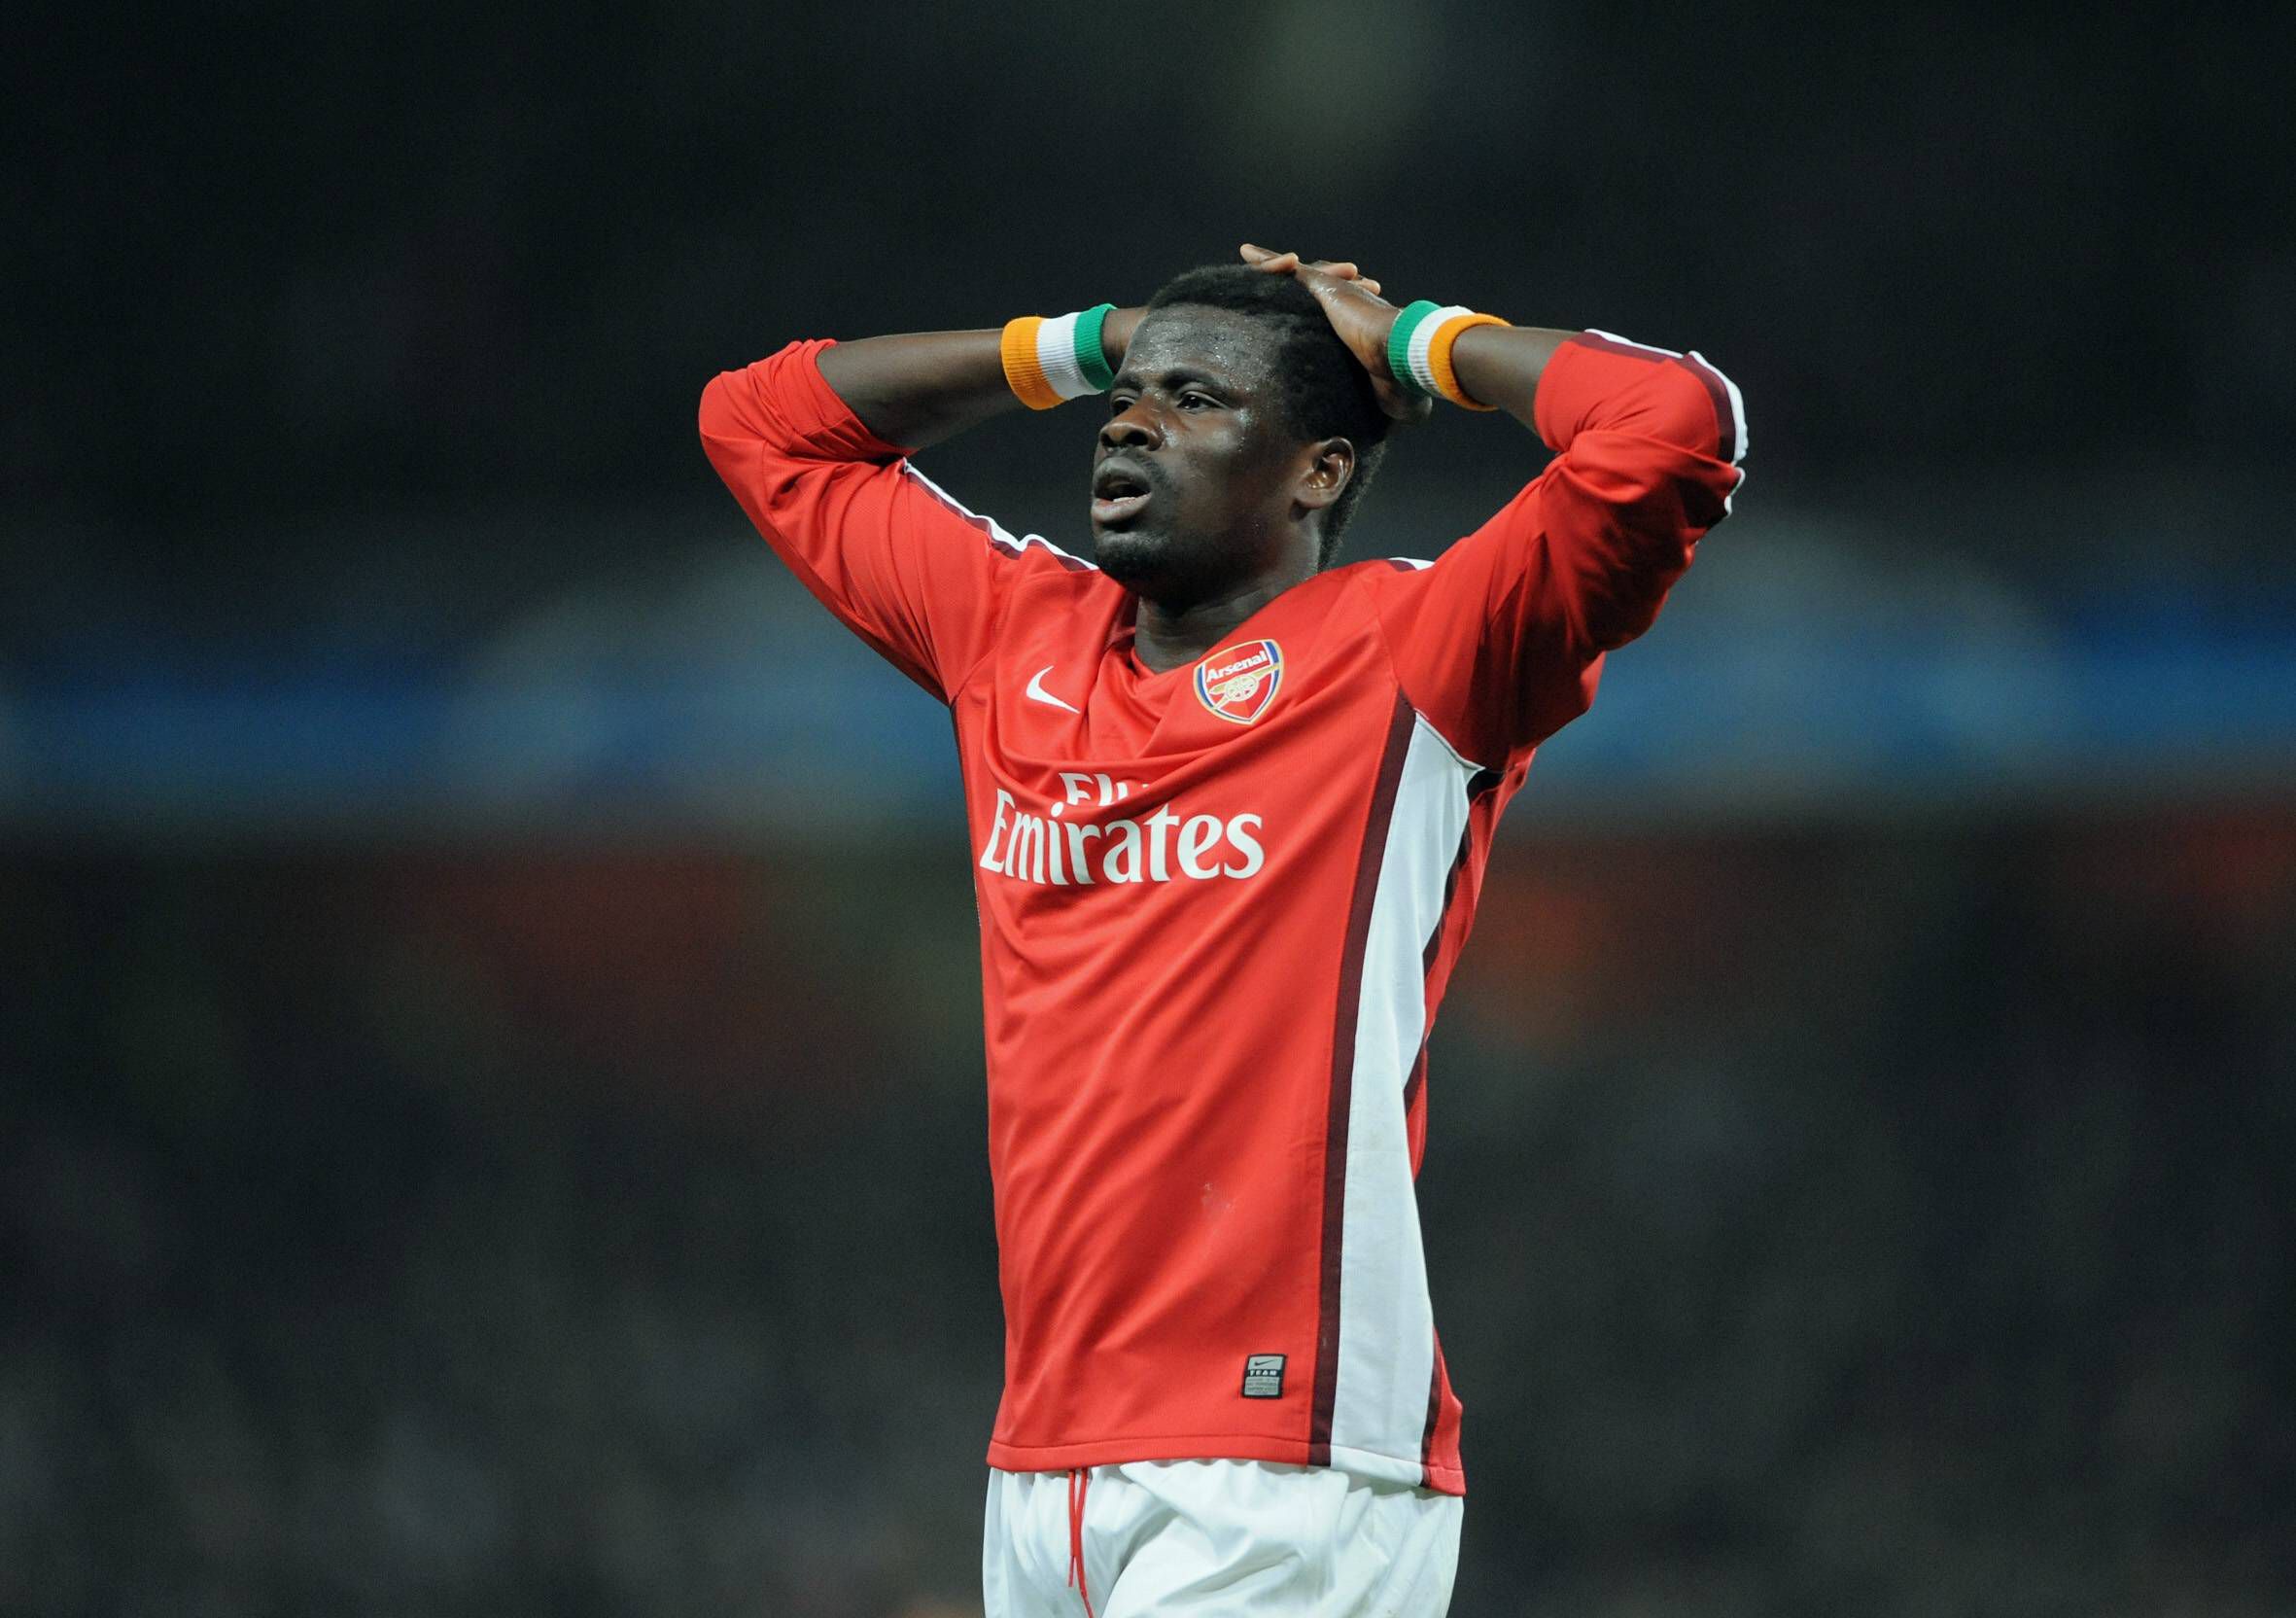 Emmanuel Eboue is among the footballers who lost huge money after their divorce